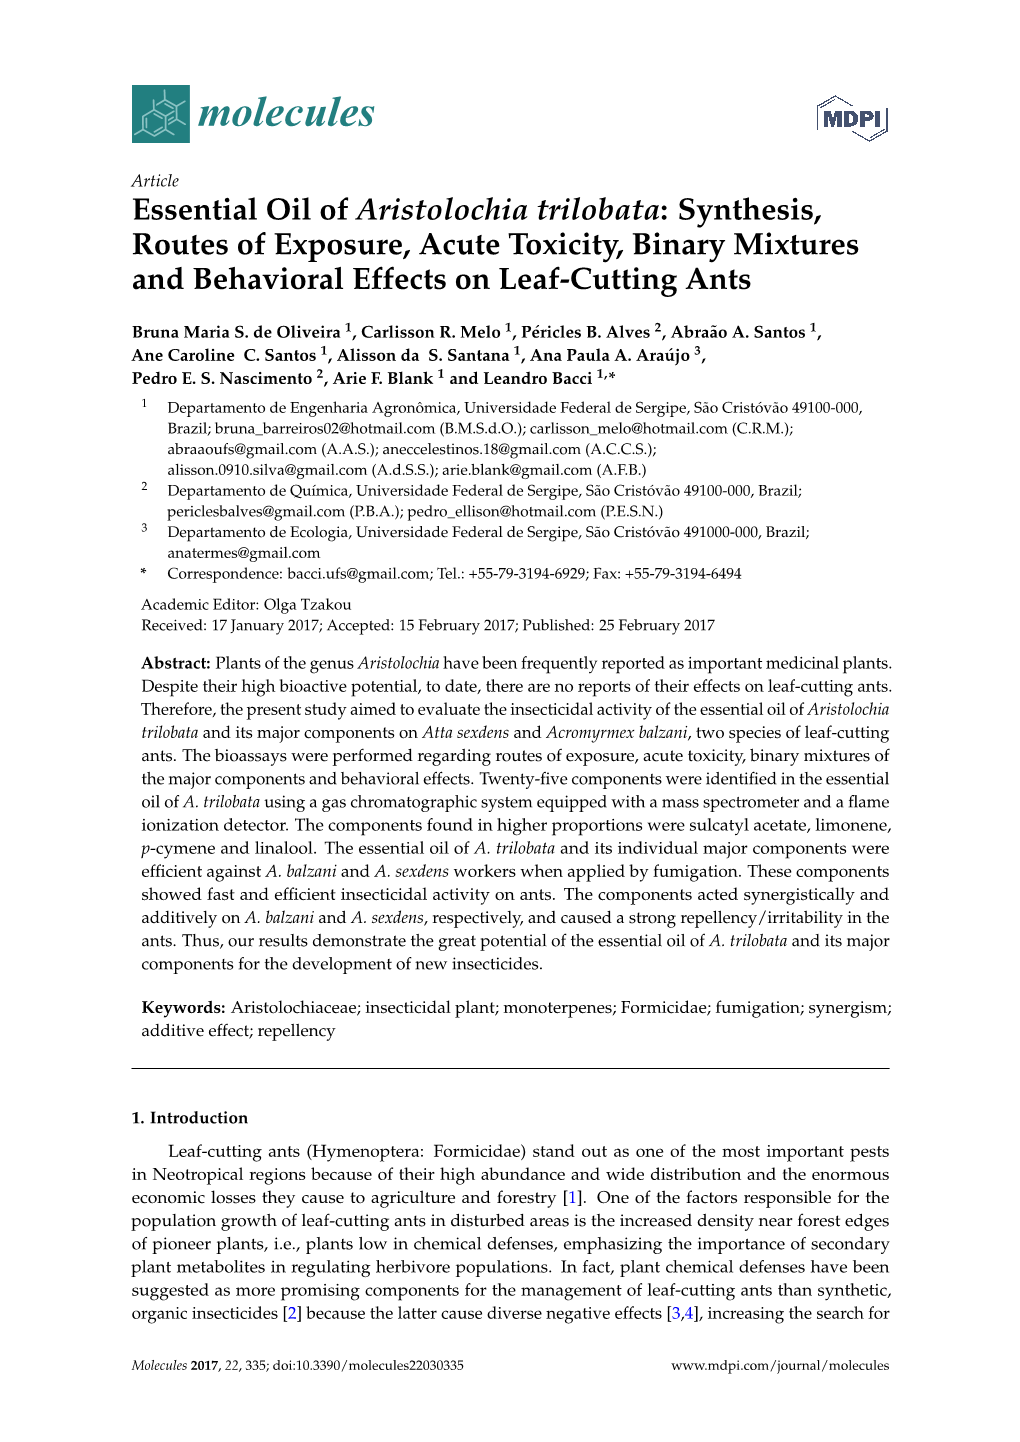 Essential Oil of Aristolochia Trilobata: Synthesis, Routes of Exposure, Acute Toxicity, Binary Mixtures and Behavioral Effects on Leaf-Cutting Ants